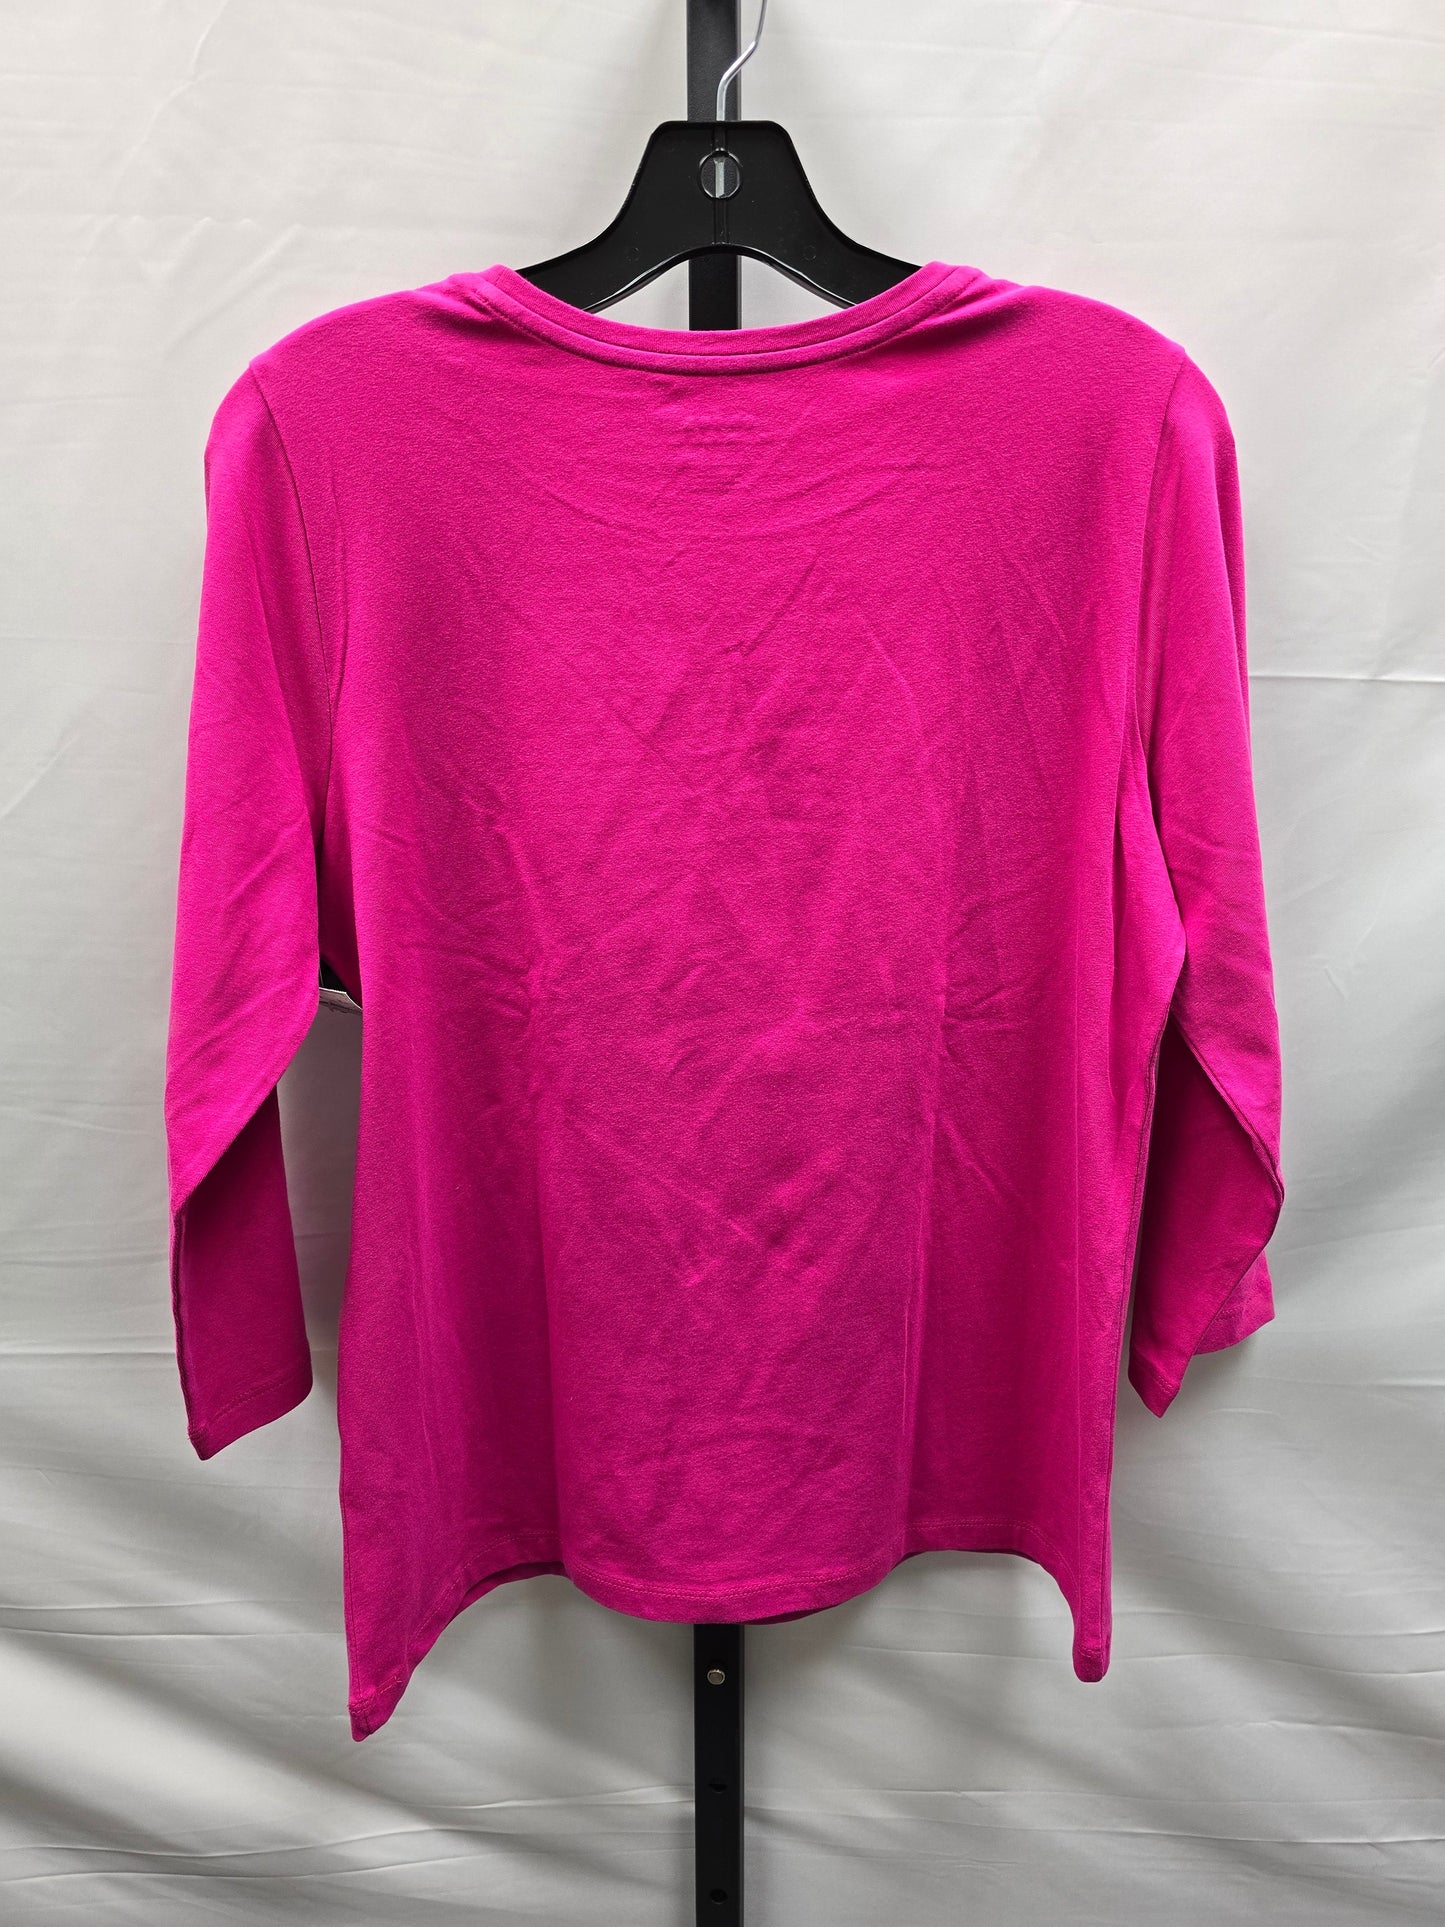 Pink Top Long Sleeve Basic Chicos, Size M